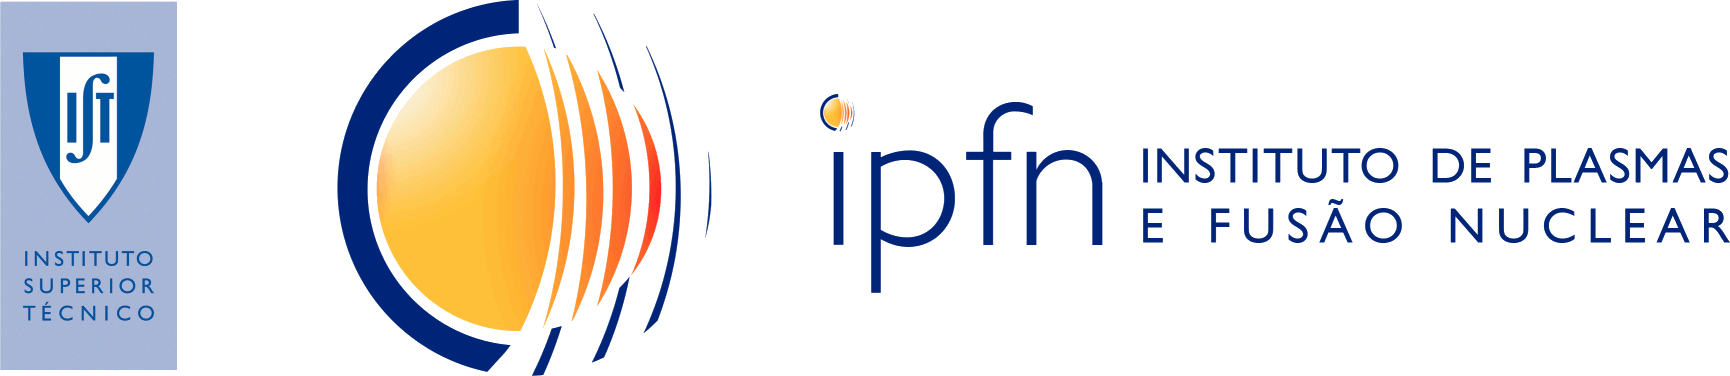 IPFN and IST Logos